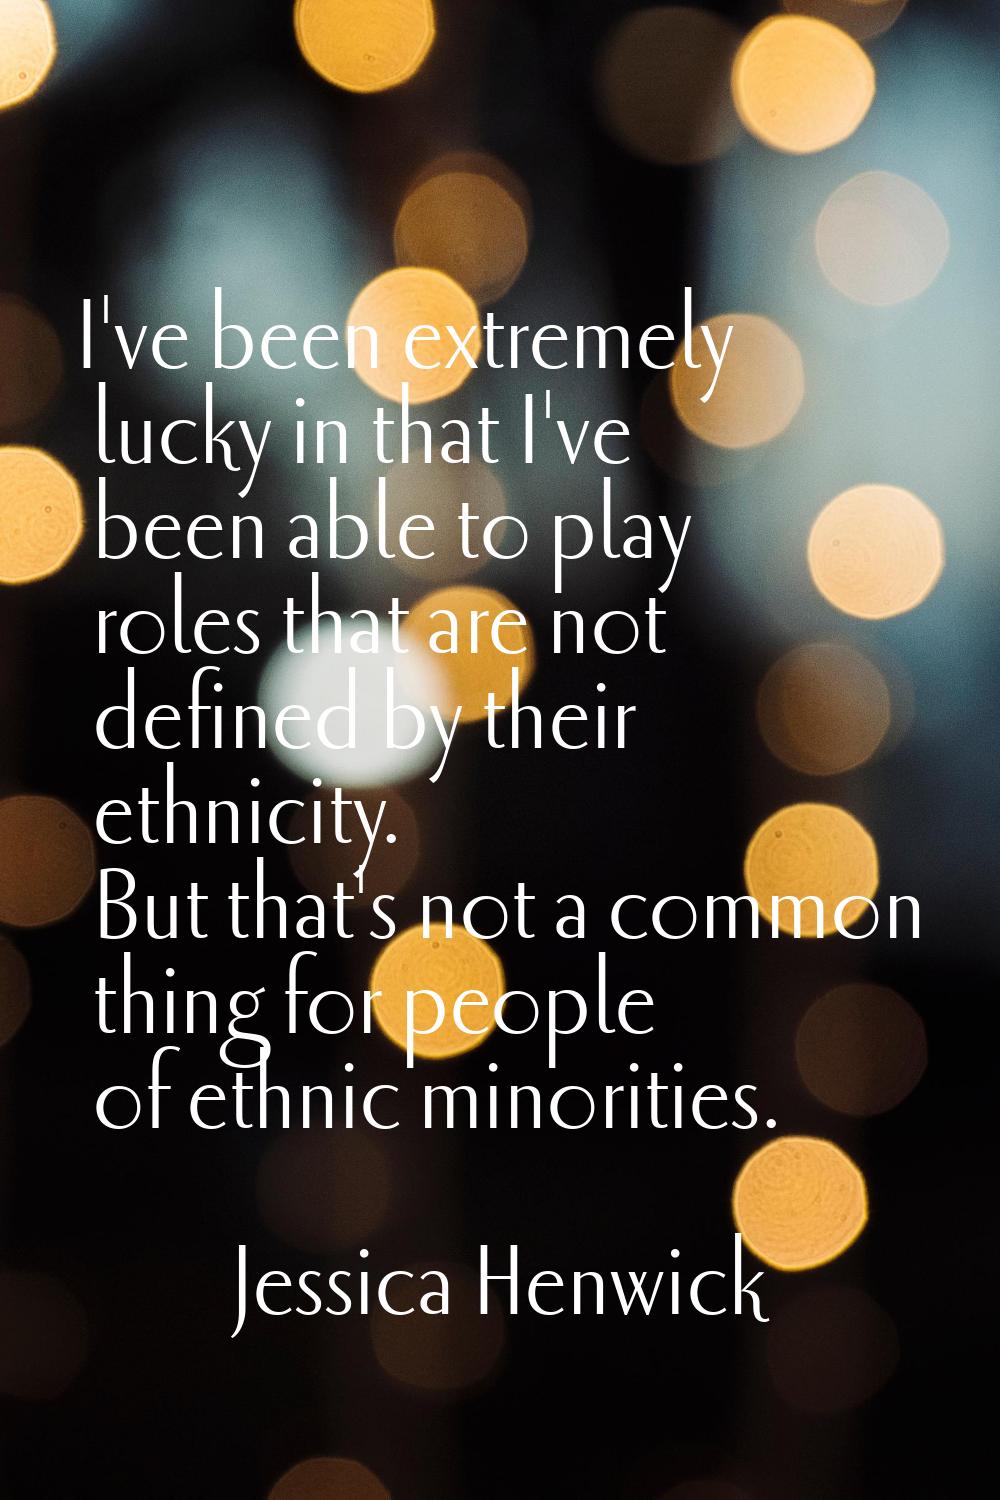 I've been extremely lucky in that I've been able to play roles that are not defined by their ethnic